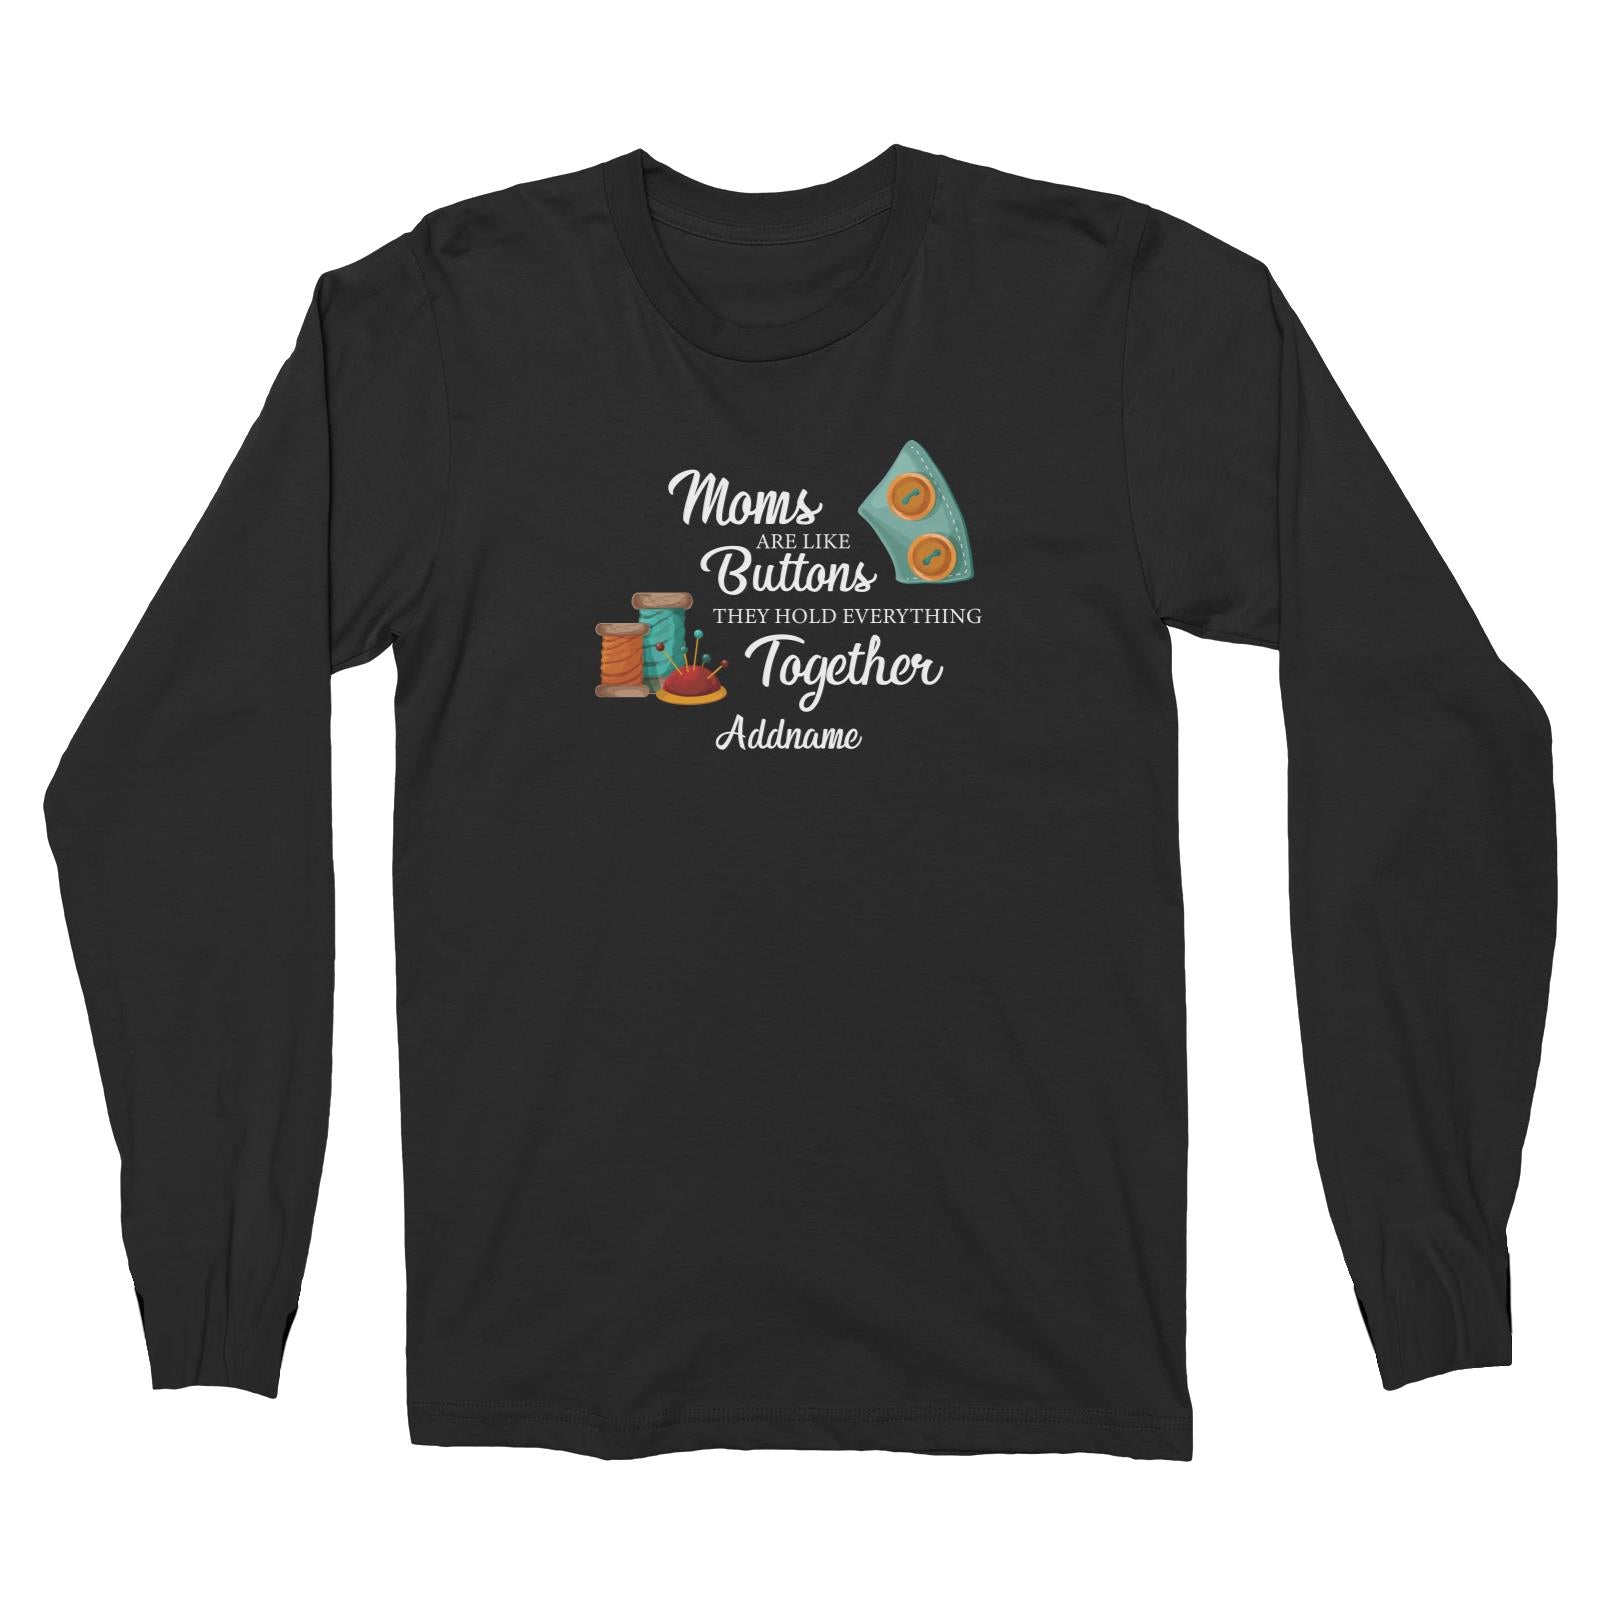 Sweet Mom Quotes 2 Moms Are Like Buttons They Hold Everything Together Addname Long Sleeve Unisex T-Shirt